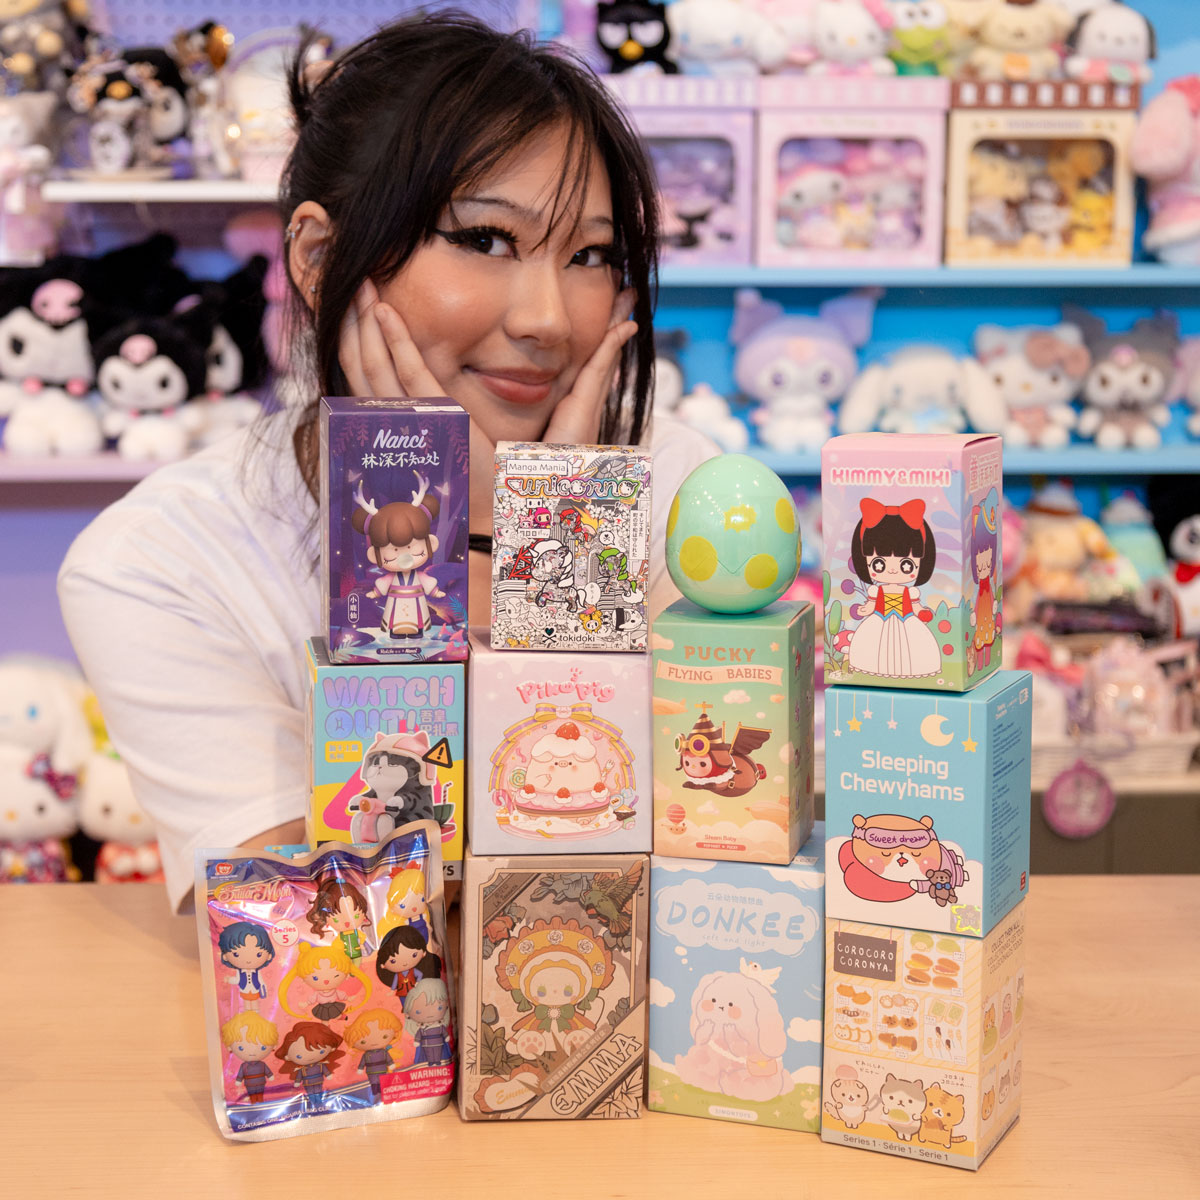 Come to JapanLA today for our Blind Box Trading Day! We have tons of open blind boxes to shop and select Buy 1 Get 1 FREE Blind Boxes 😍 We'll have a table so you can trade your open blinds and make new friends! We're open 11am - 6pm 233 S La Brea Ave, Los Angeles, CA 90036